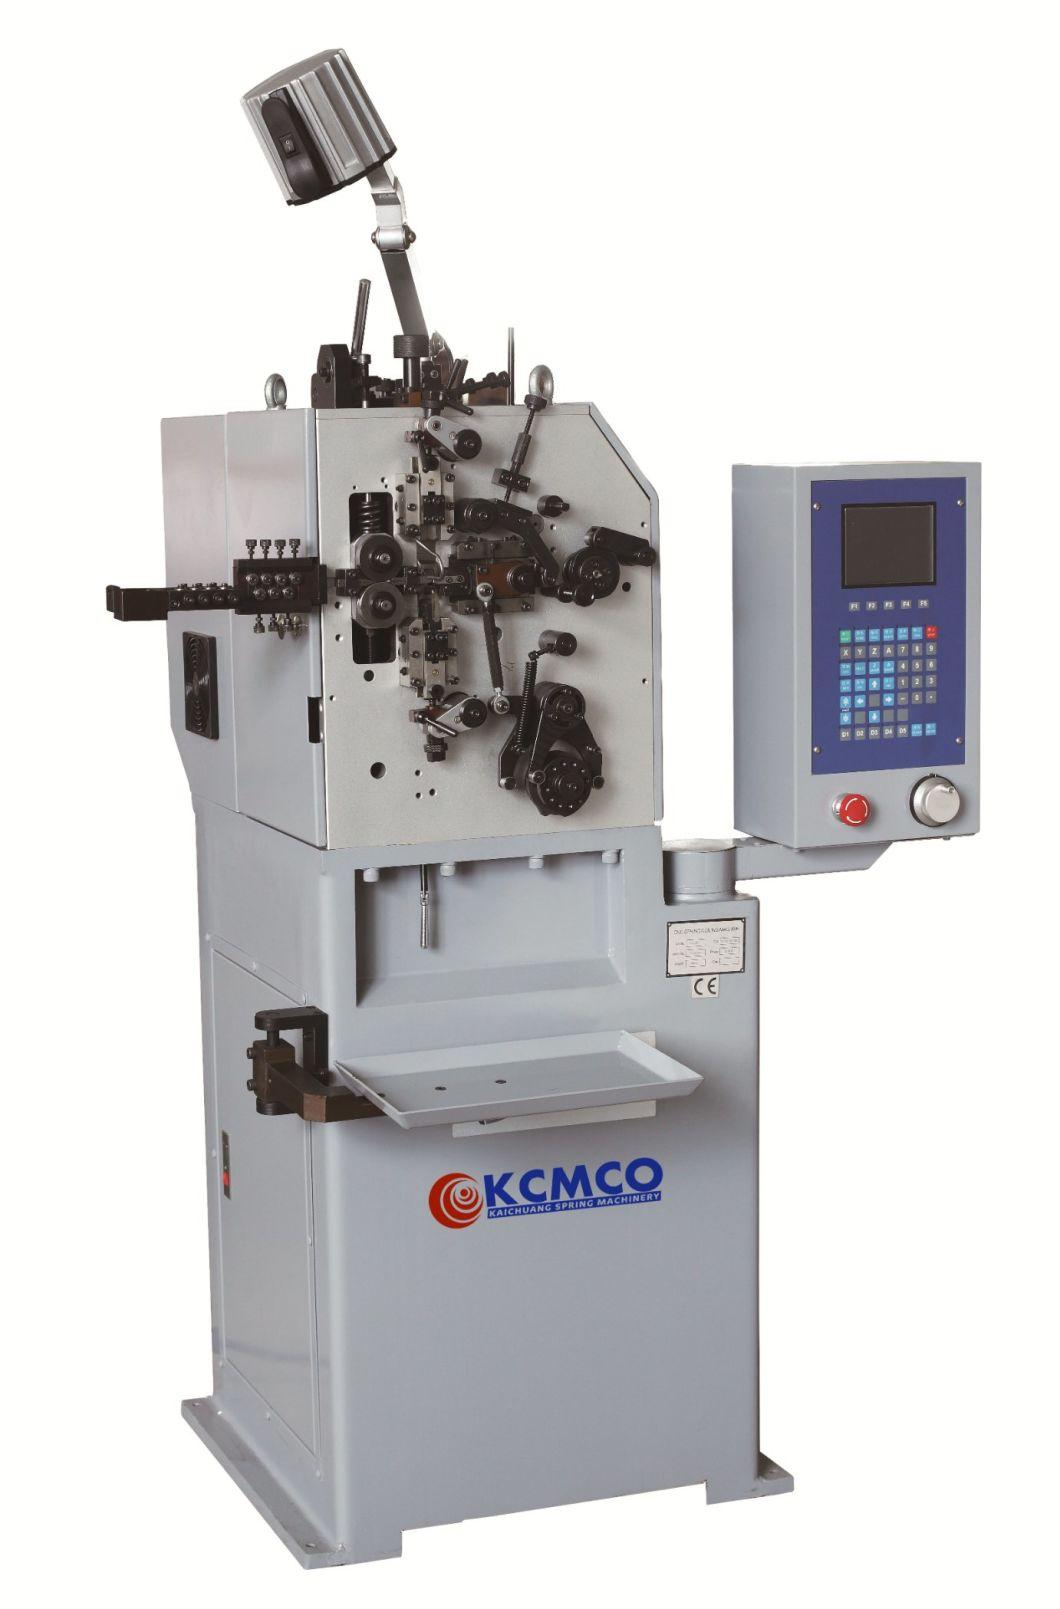 KCMCO-KCT-208 0.15-0.8mm CNC High Speed Compression Spring Coiling Machine with Torsion Device